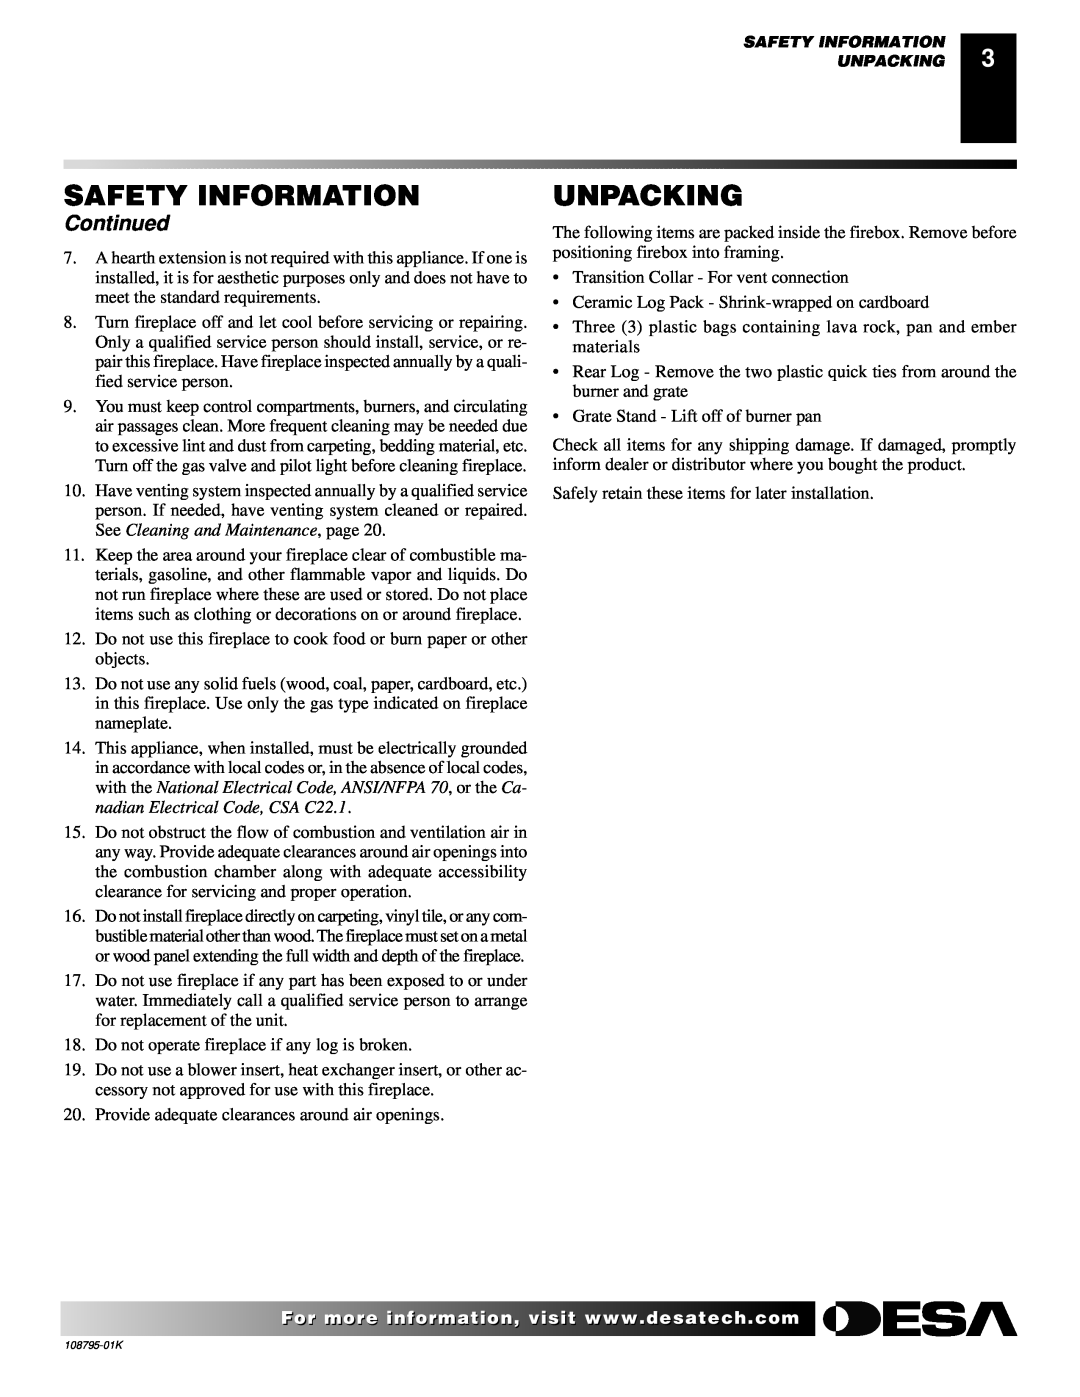 Desa AND VM42 installation manual Unpacking, Continued, Safety Information 